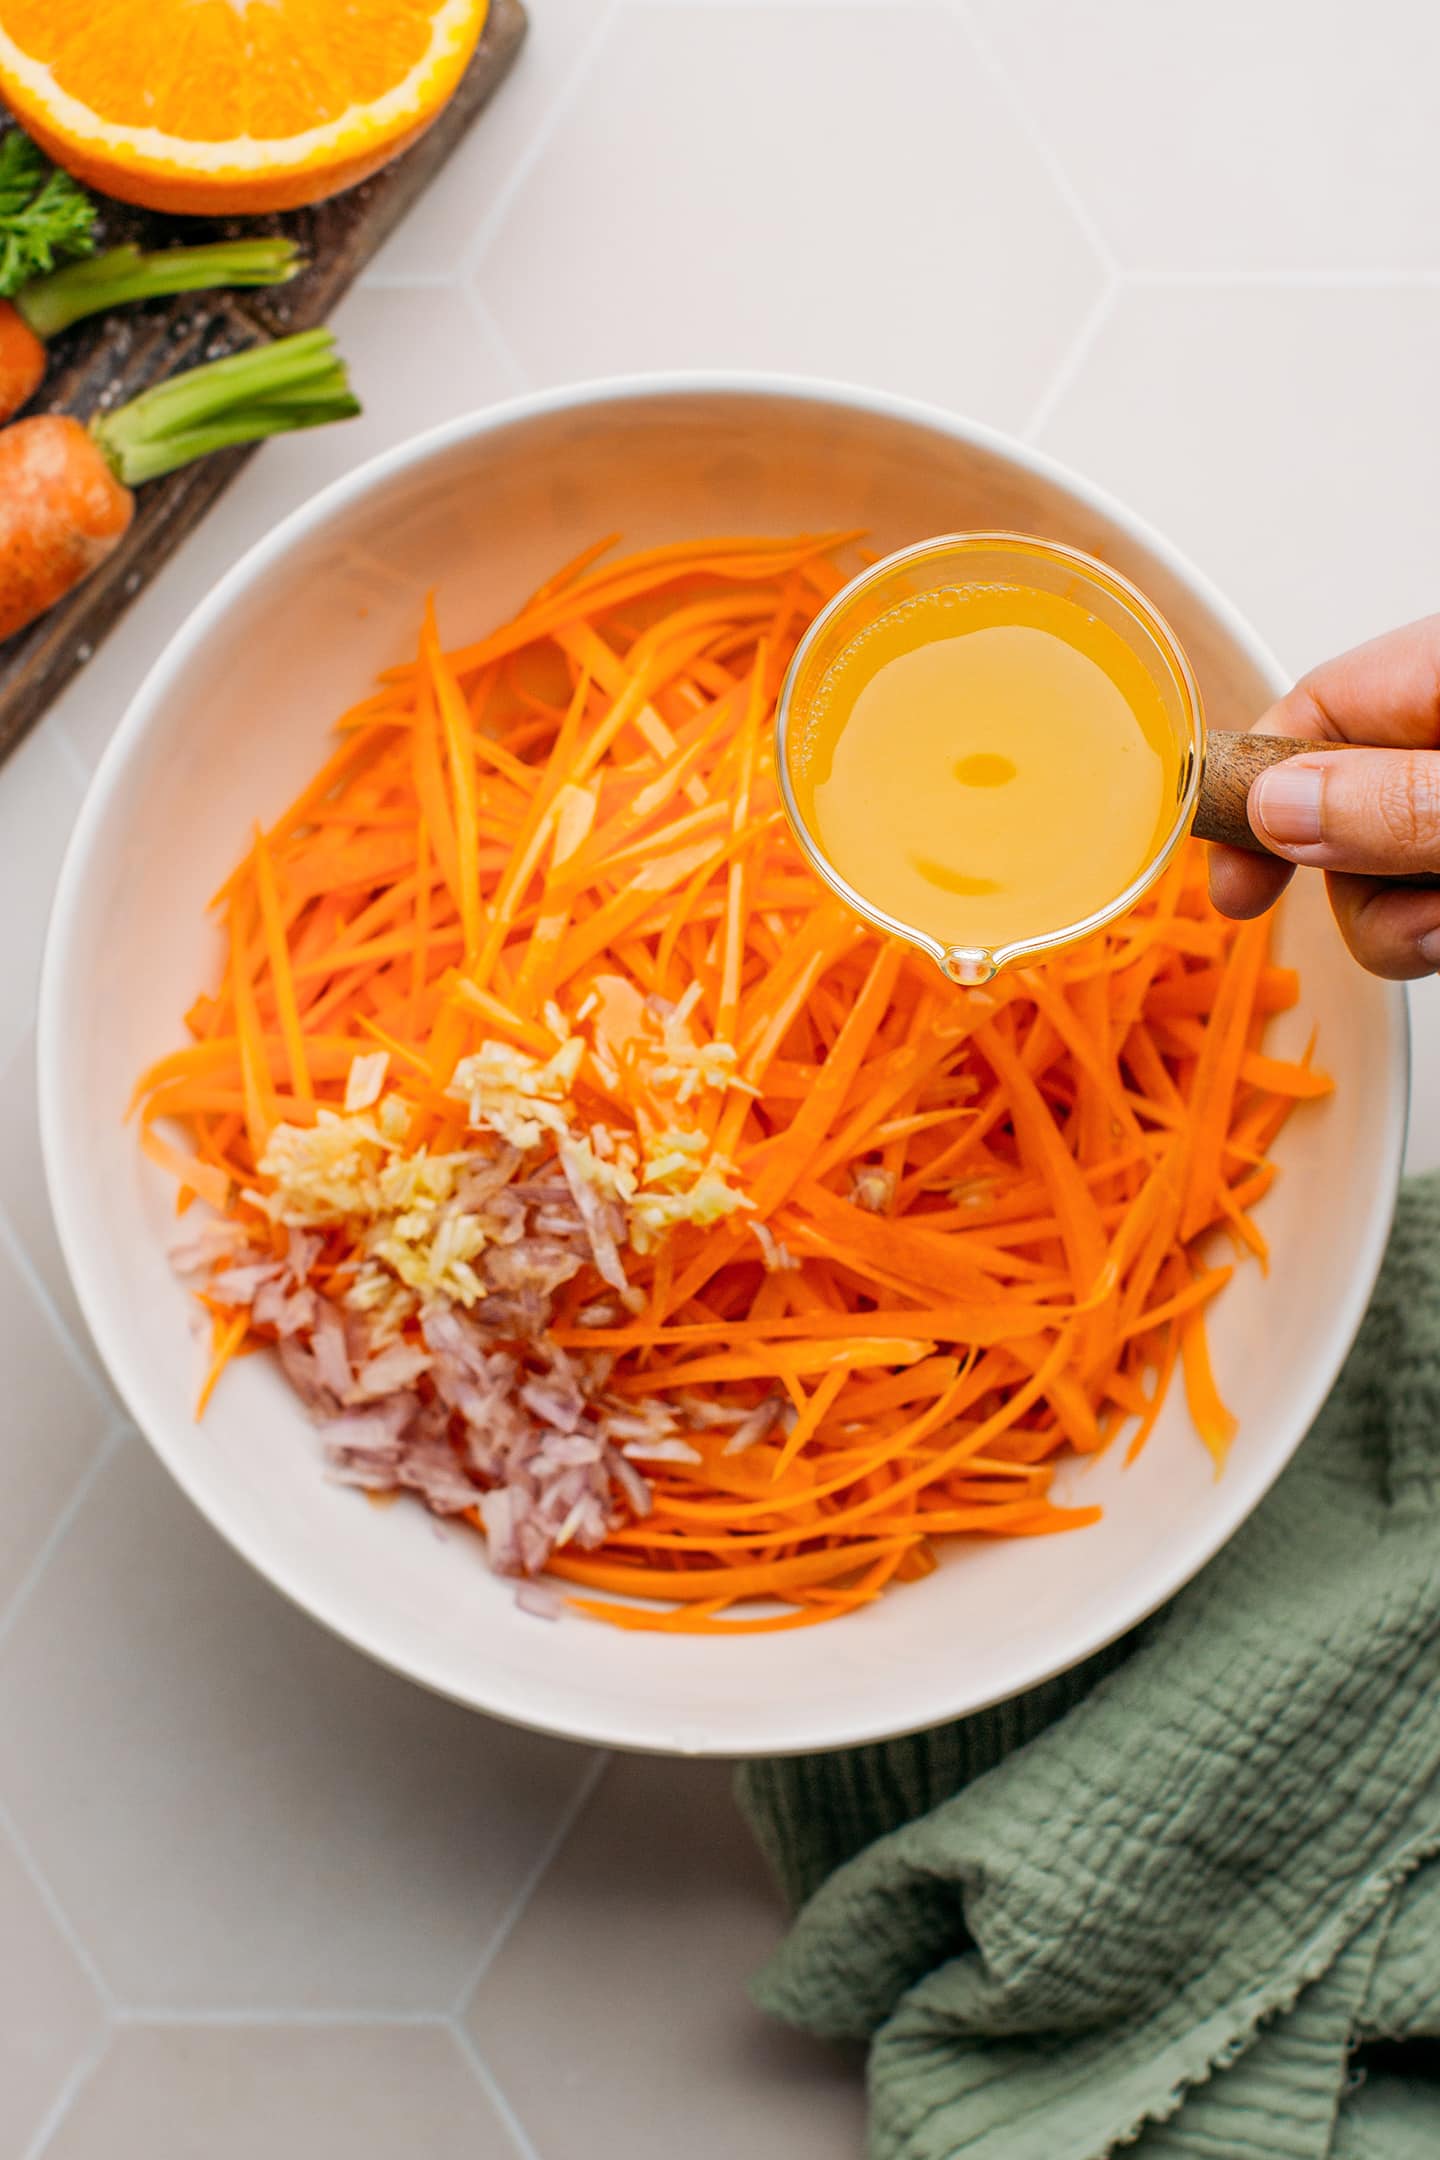 Pouring orange juice into a bowl containing grated carrots.